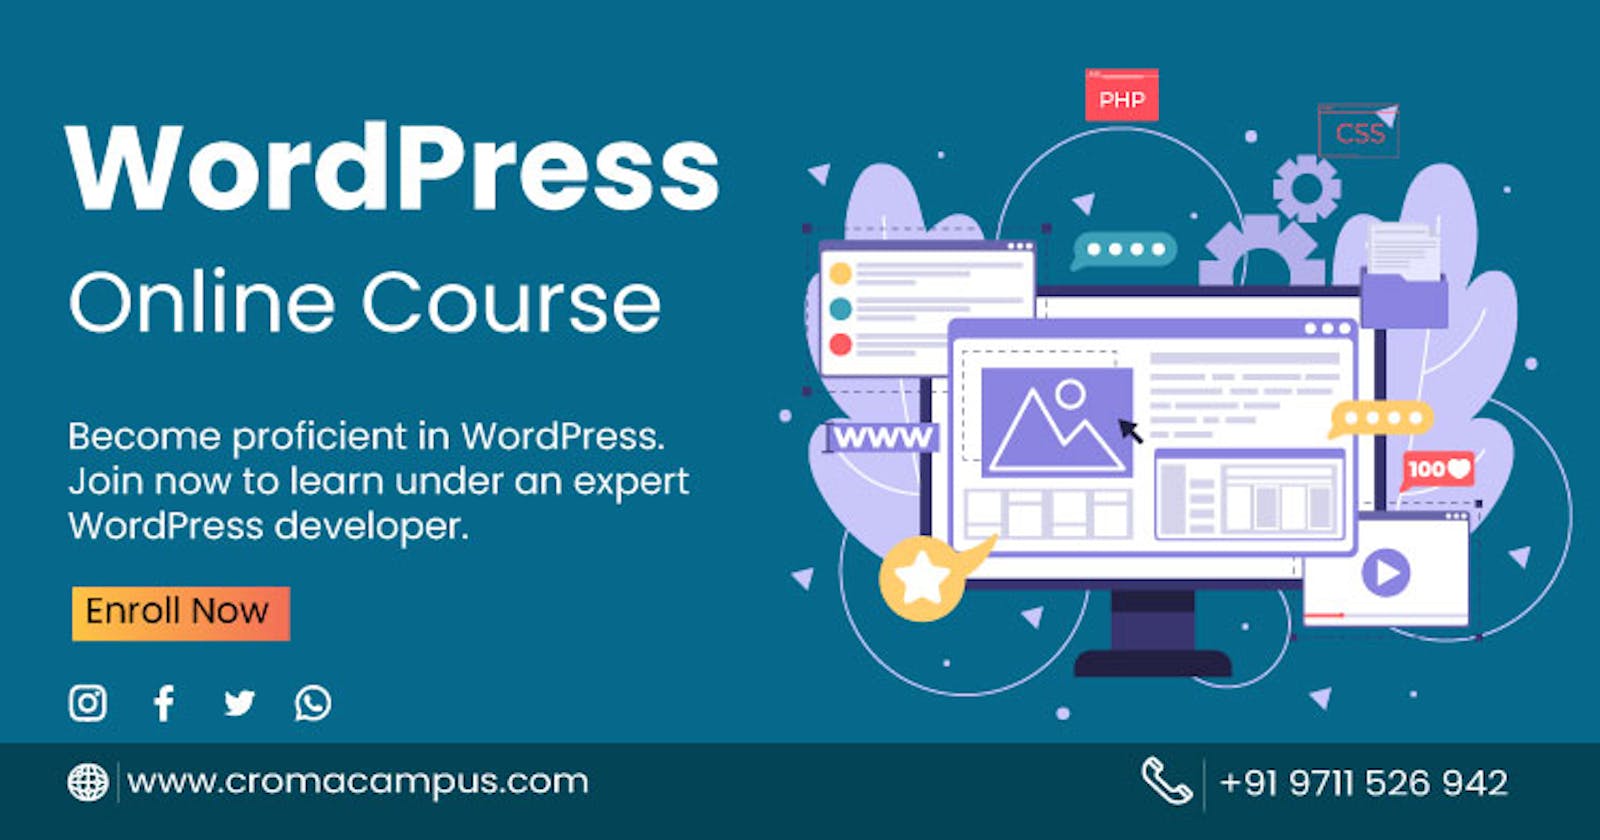 What Career Opportunities Can I Get After Learning WordPress?